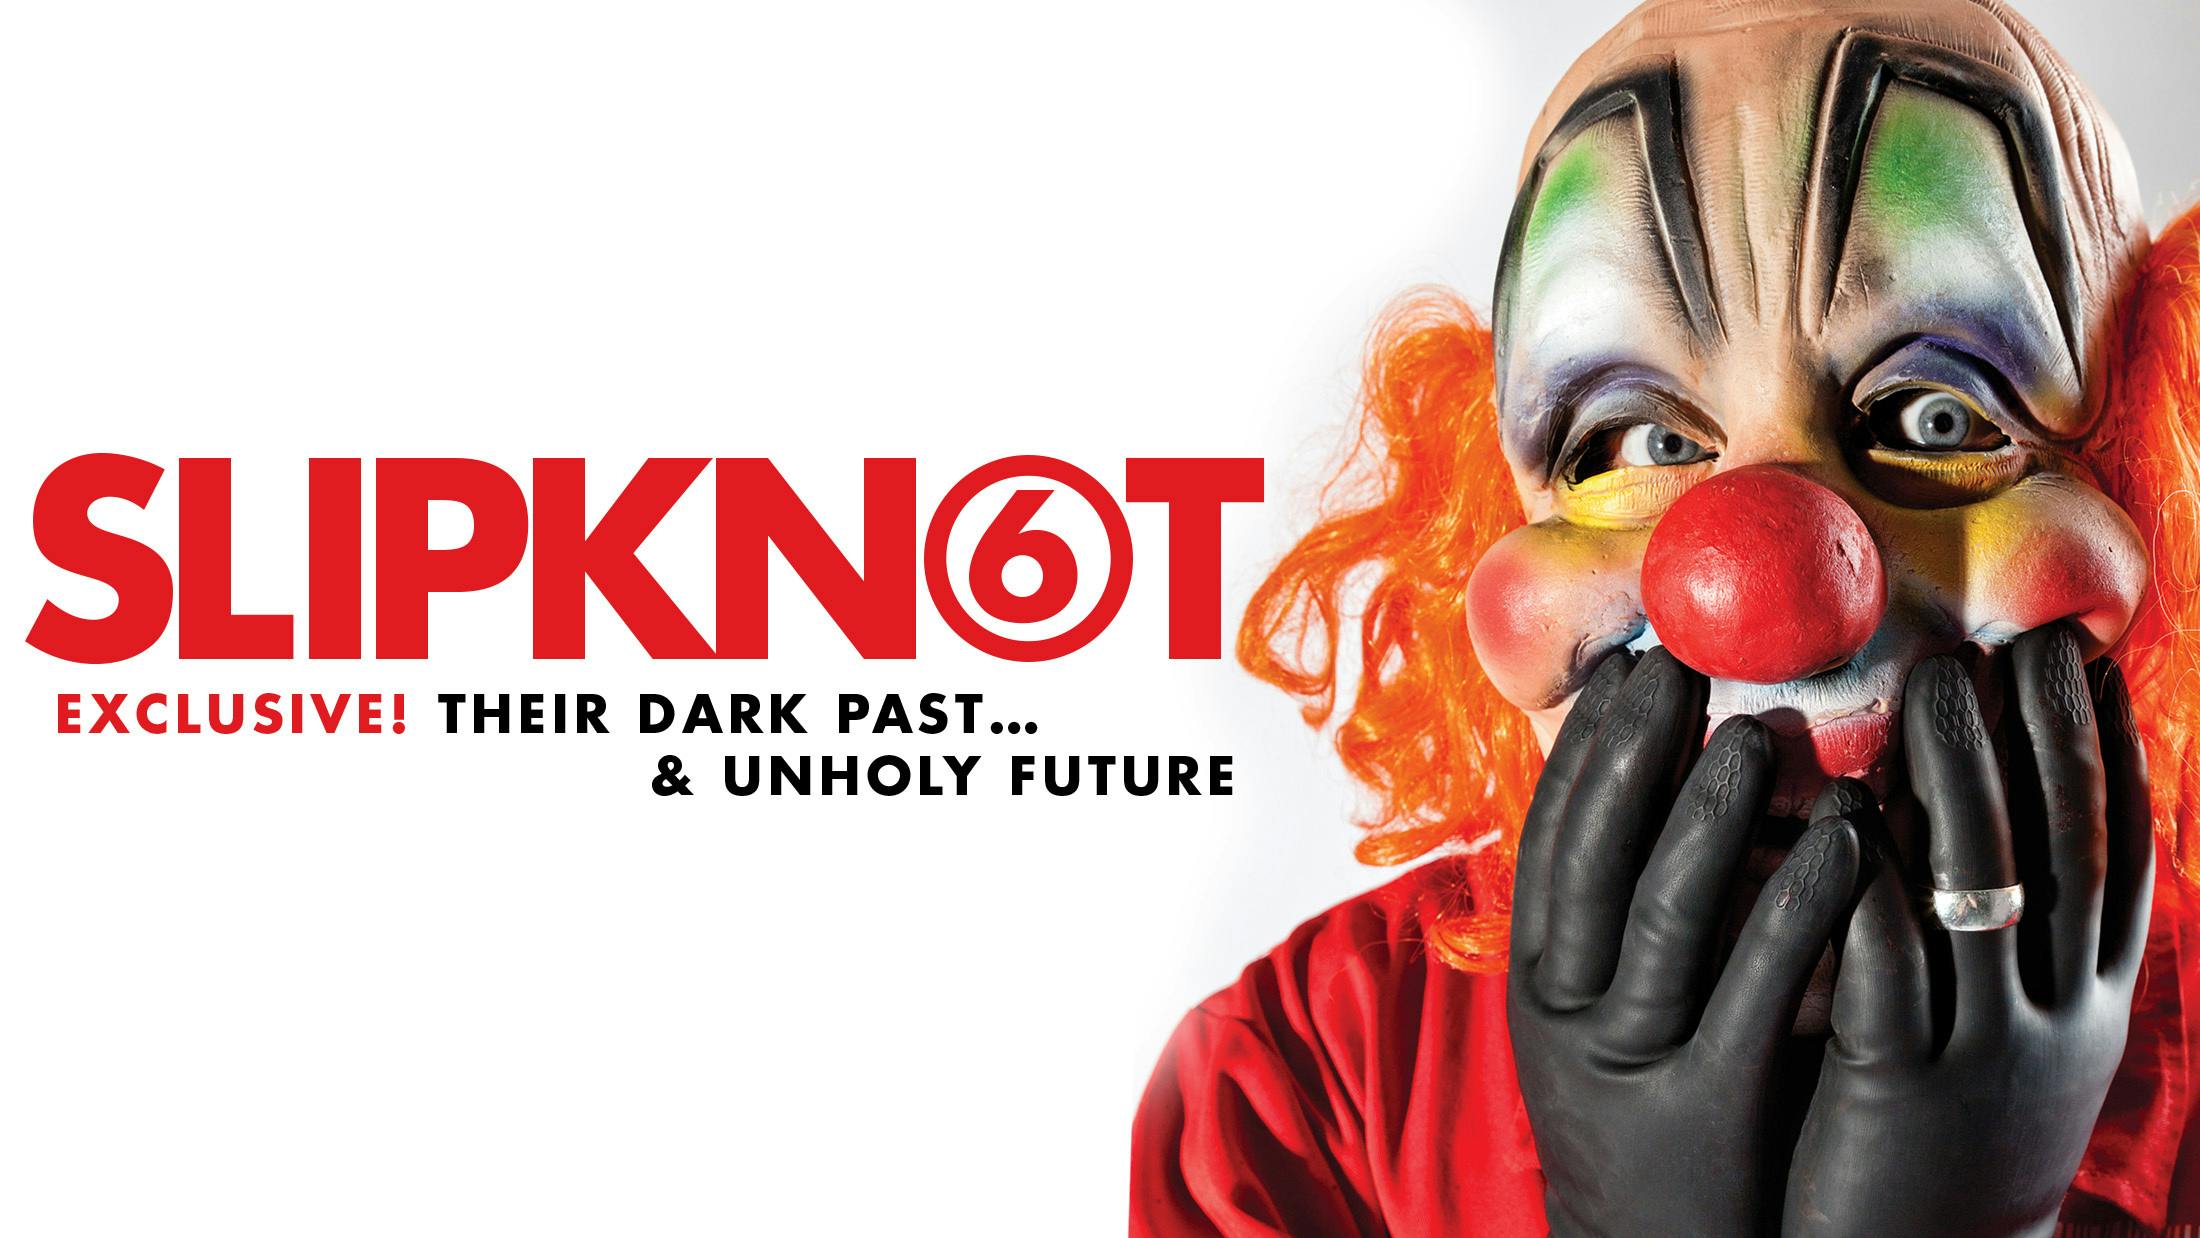 K!1751 – Slipknot: "You Have No Idea What's Coming Next…"